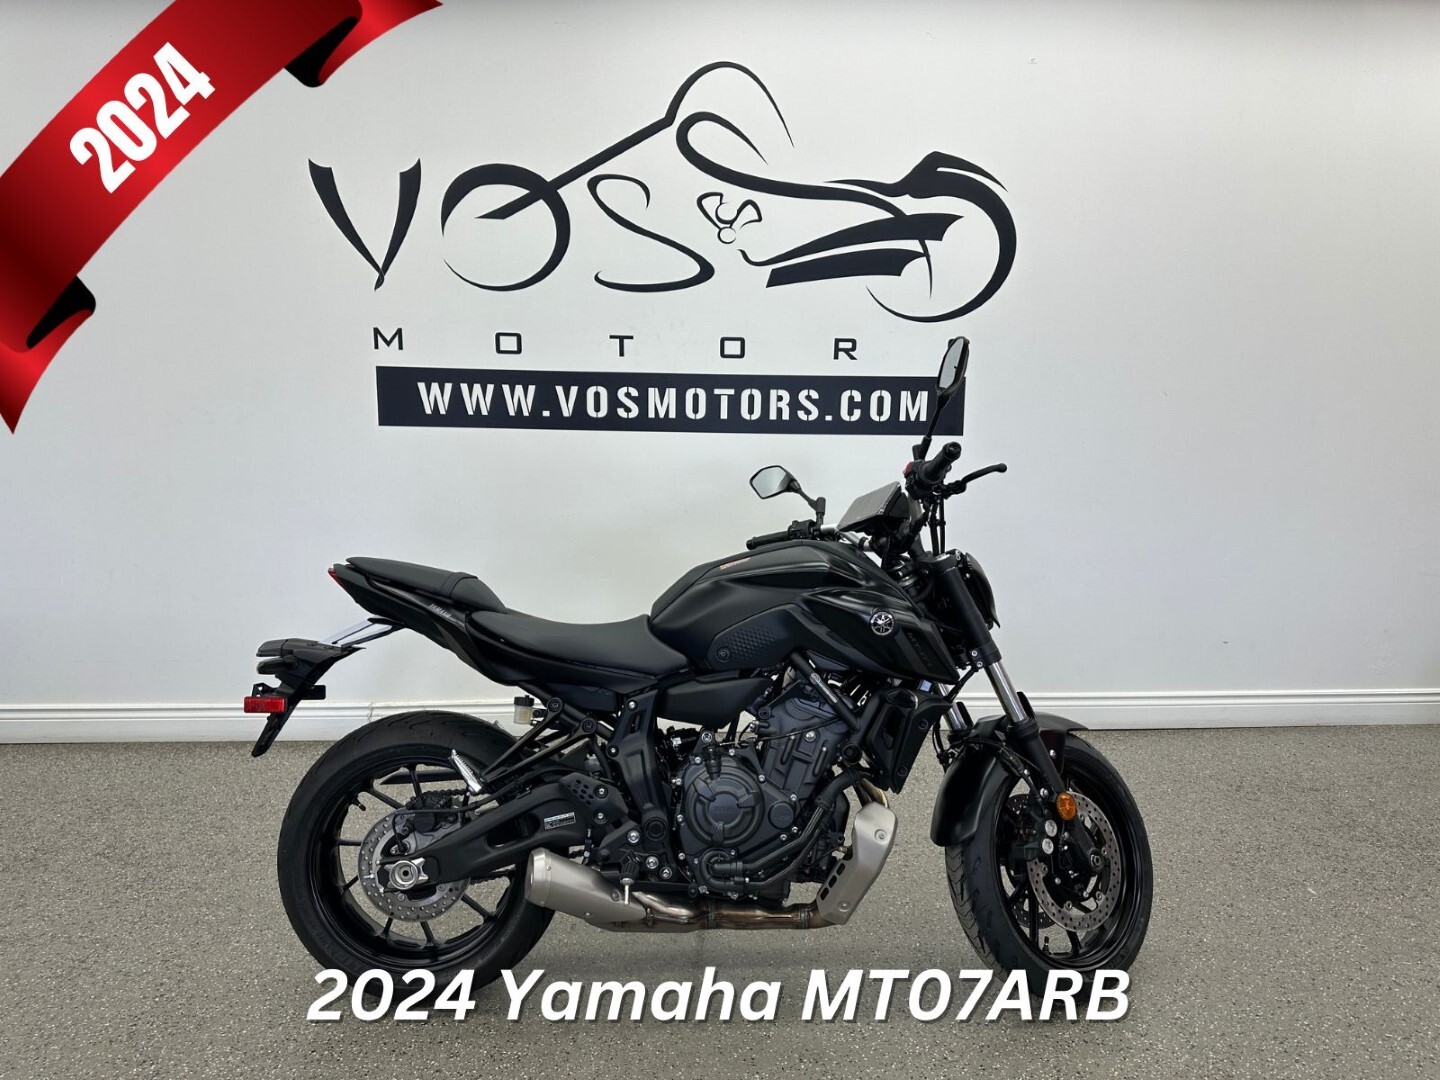 2024 Yamaha MT07ARB MT07ARB - V6016NP - -No Payments for 1 Year**